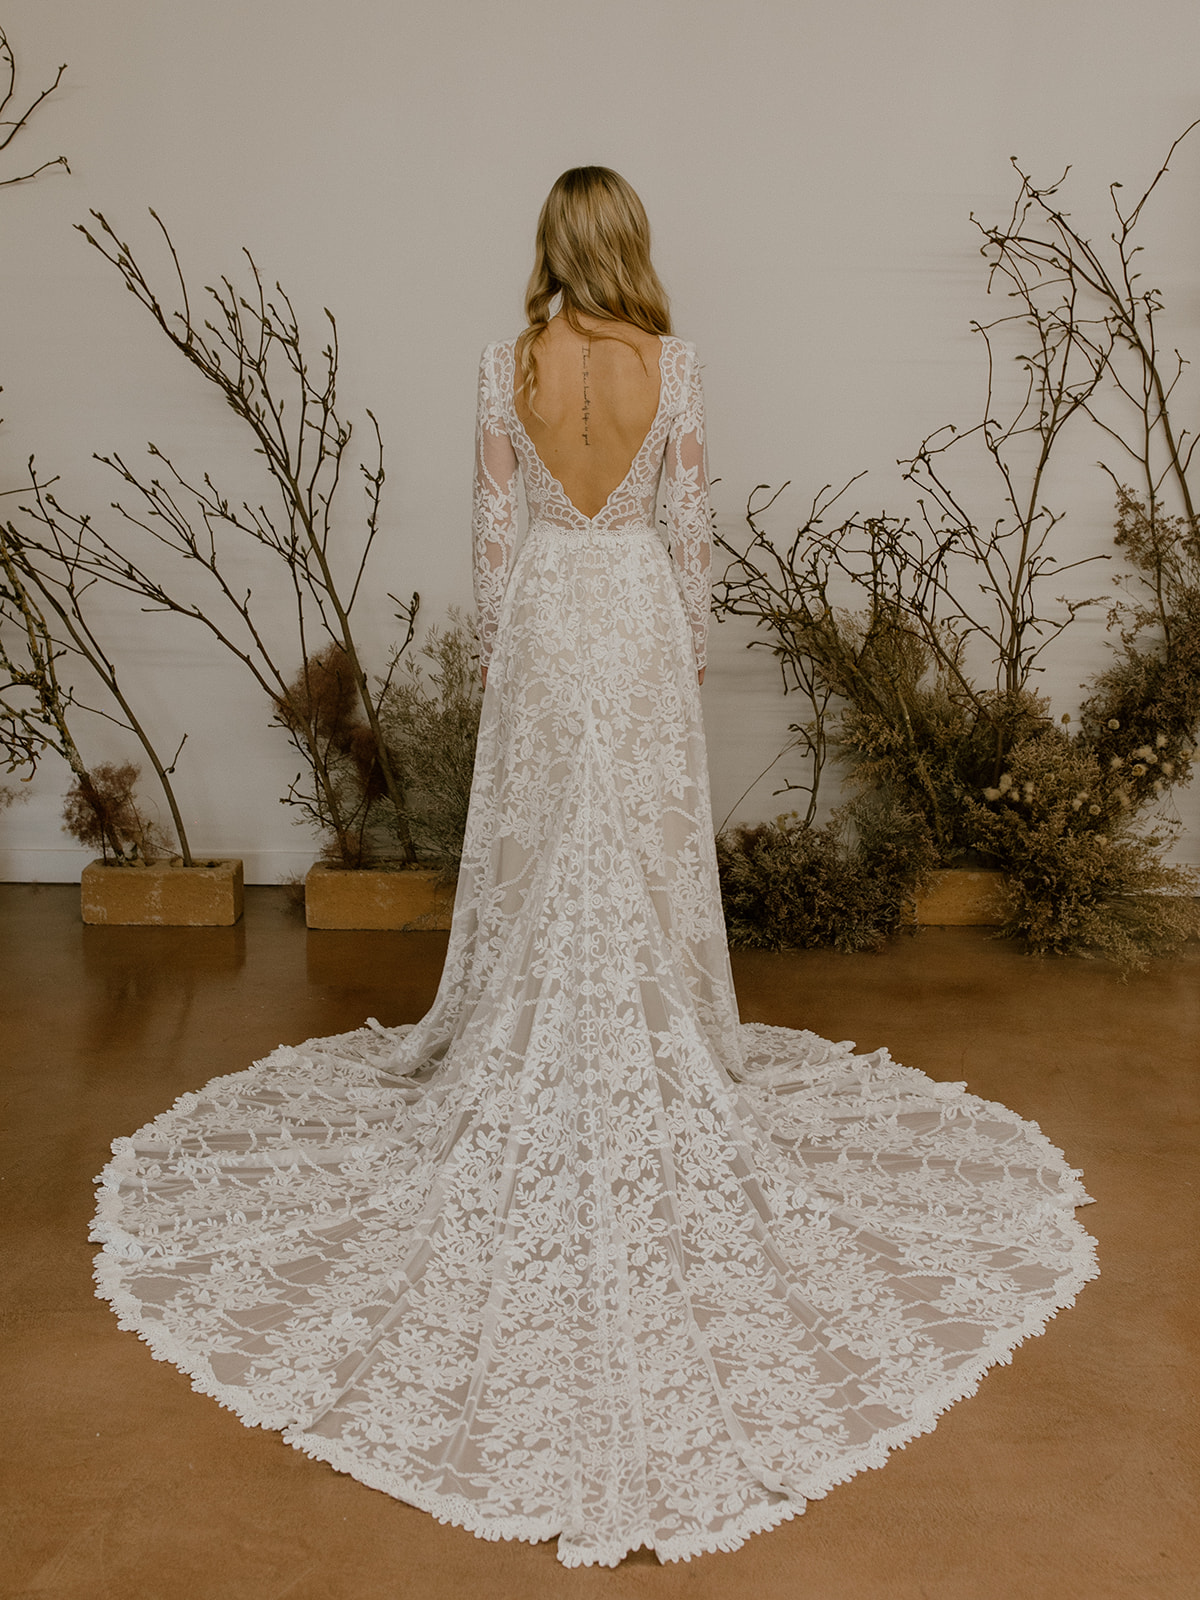 Dahlia-lace-elegant-flowy-wedding-dress-for-the-bride-looking-for-a-classic-romantic-silhouette